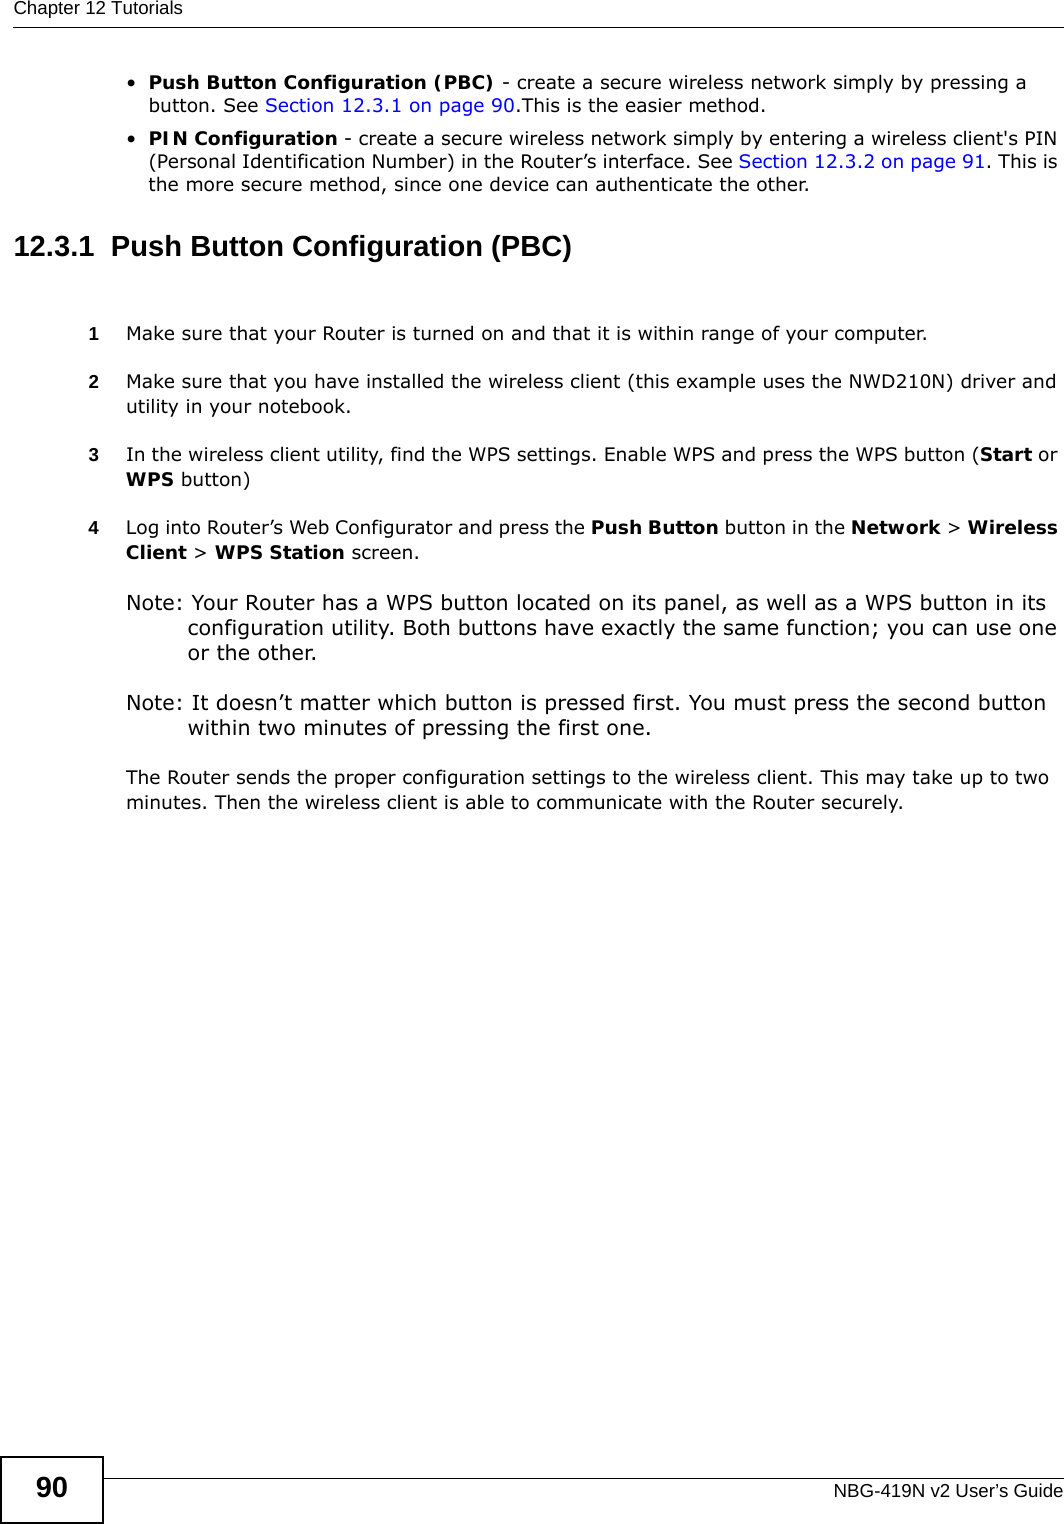 Chapter 12 TutorialsNBG-419N v2 User’s Guide90•Push Button Configuration (PBC) - create a secure wireless network simply by pressing a button. See Section 12.3.1 on page 90.This is the easier method.•PIN Configuration - create a secure wireless network simply by entering a wireless client&apos;s PIN (Personal Identification Number) in the Router’s interface. See Section 12.3.2 on page 91. This is the more secure method, since one device can authenticate the other.12.3.1  Push Button Configuration (PBC)1Make sure that your Router is turned on and that it is within range of your computer. 2Make sure that you have installed the wireless client (this example uses the NWD210N) driver and utility in your notebook.3In the wireless client utility, find the WPS settings. Enable WPS and press the WPS button (Start or WPS button)4Log into Router’s Web Configurator and press the Push Button button in the Network &gt; Wireless Client &gt; WPS Station screen. Note: Your Router has a WPS button located on its panel, as well as a WPS button in its configuration utility. Both buttons have exactly the same function; you can use one or the other.Note: It doesn’t matter which button is pressed first. You must press the second button within two minutes of pressing the first one. The Router sends the proper configuration settings to the wireless client. This may take up to two minutes. Then the wireless client is able to communicate with the Router securely. 